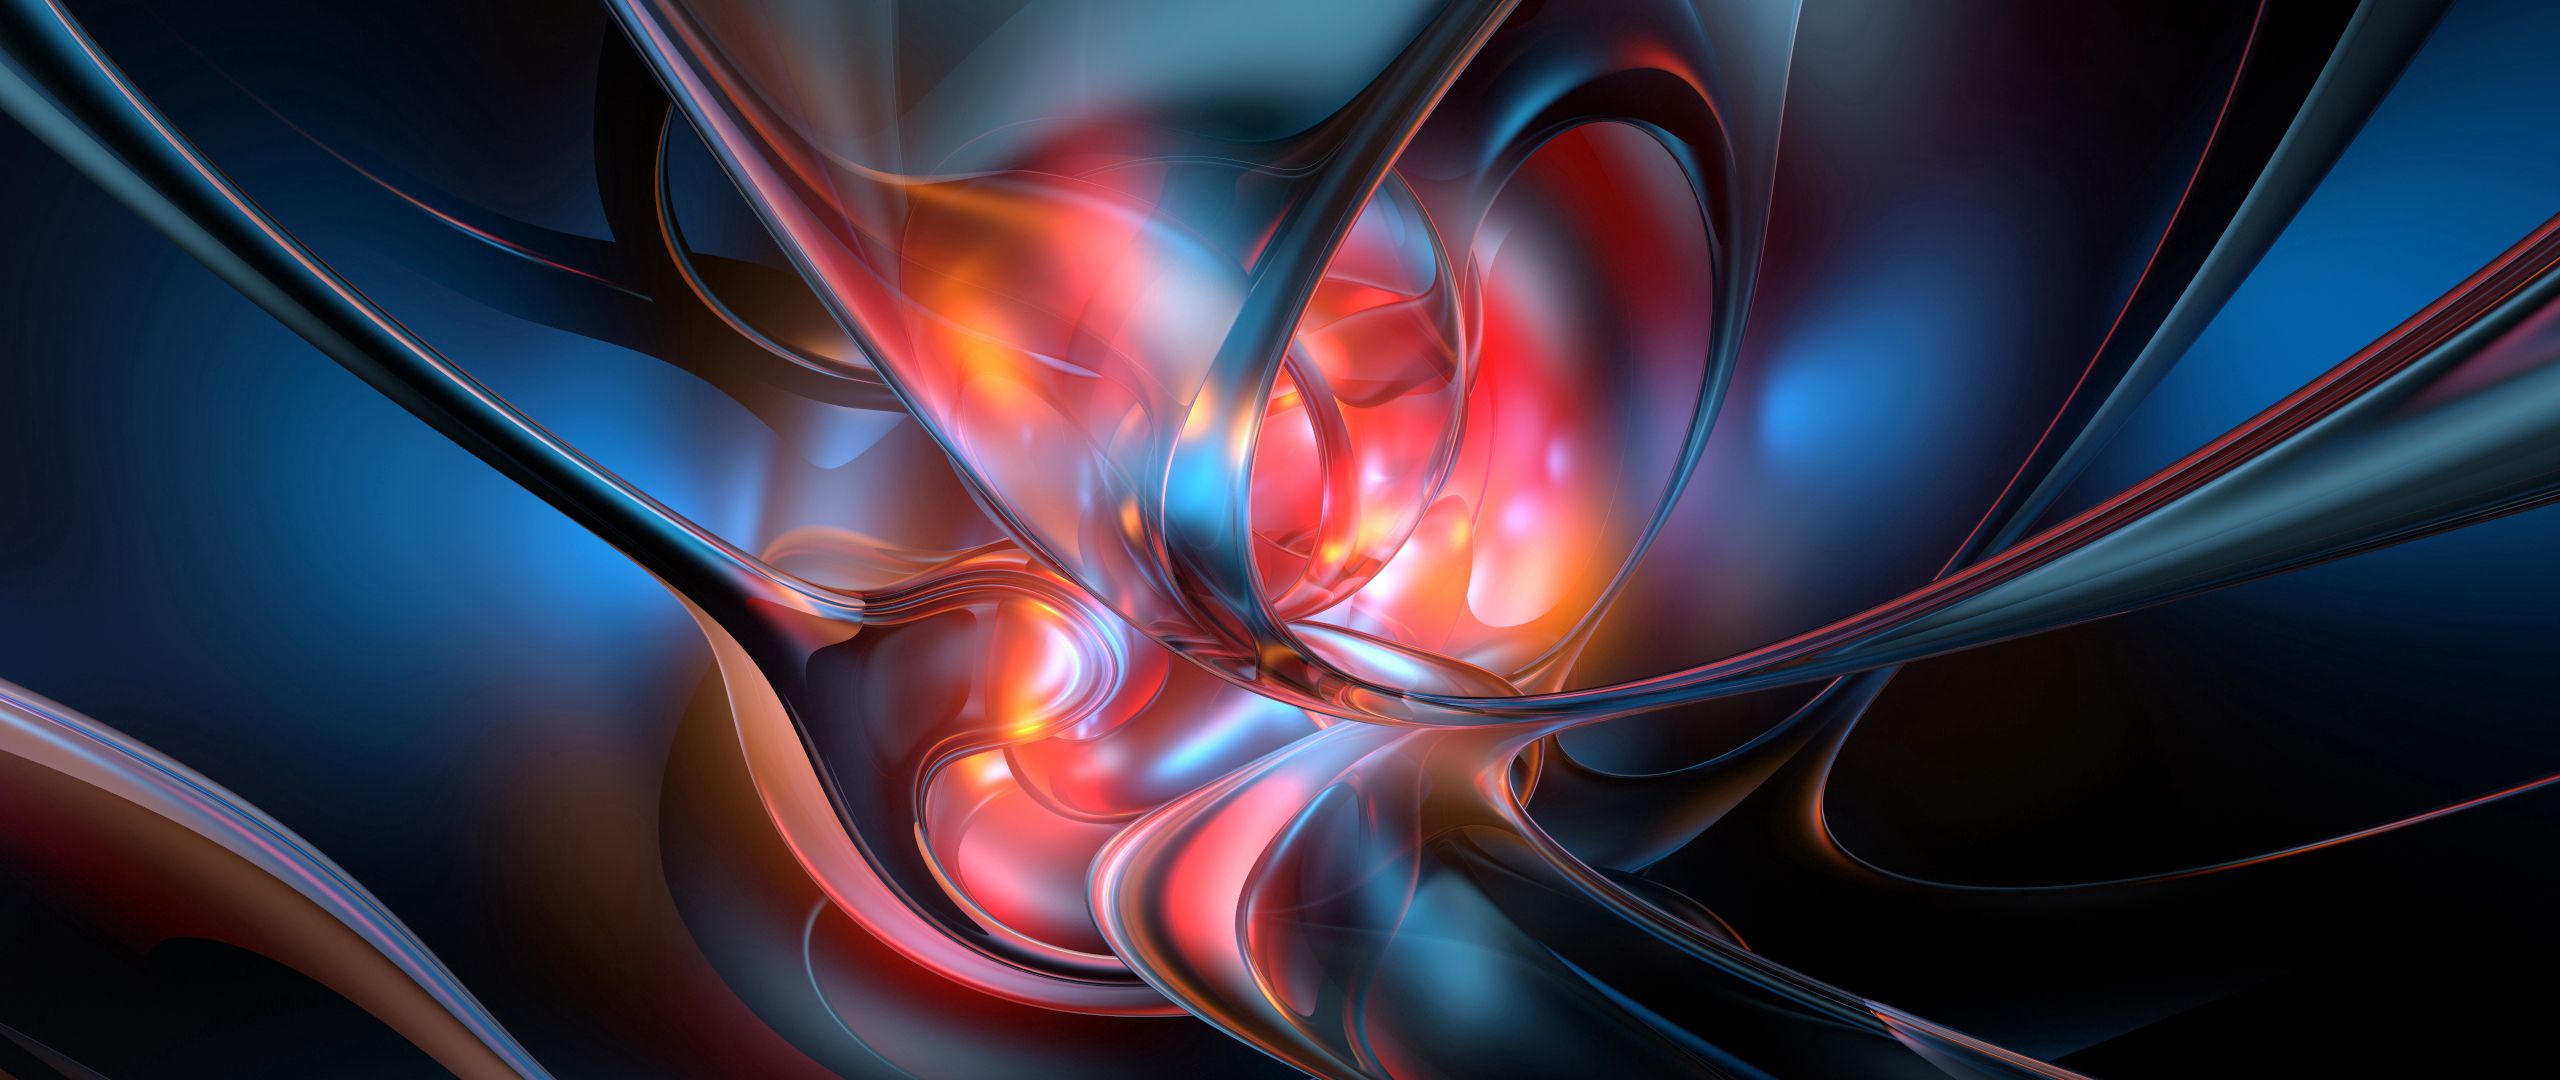 Download wallpaper 2560x1080 abstract, blue, red, spiral dual wide ...